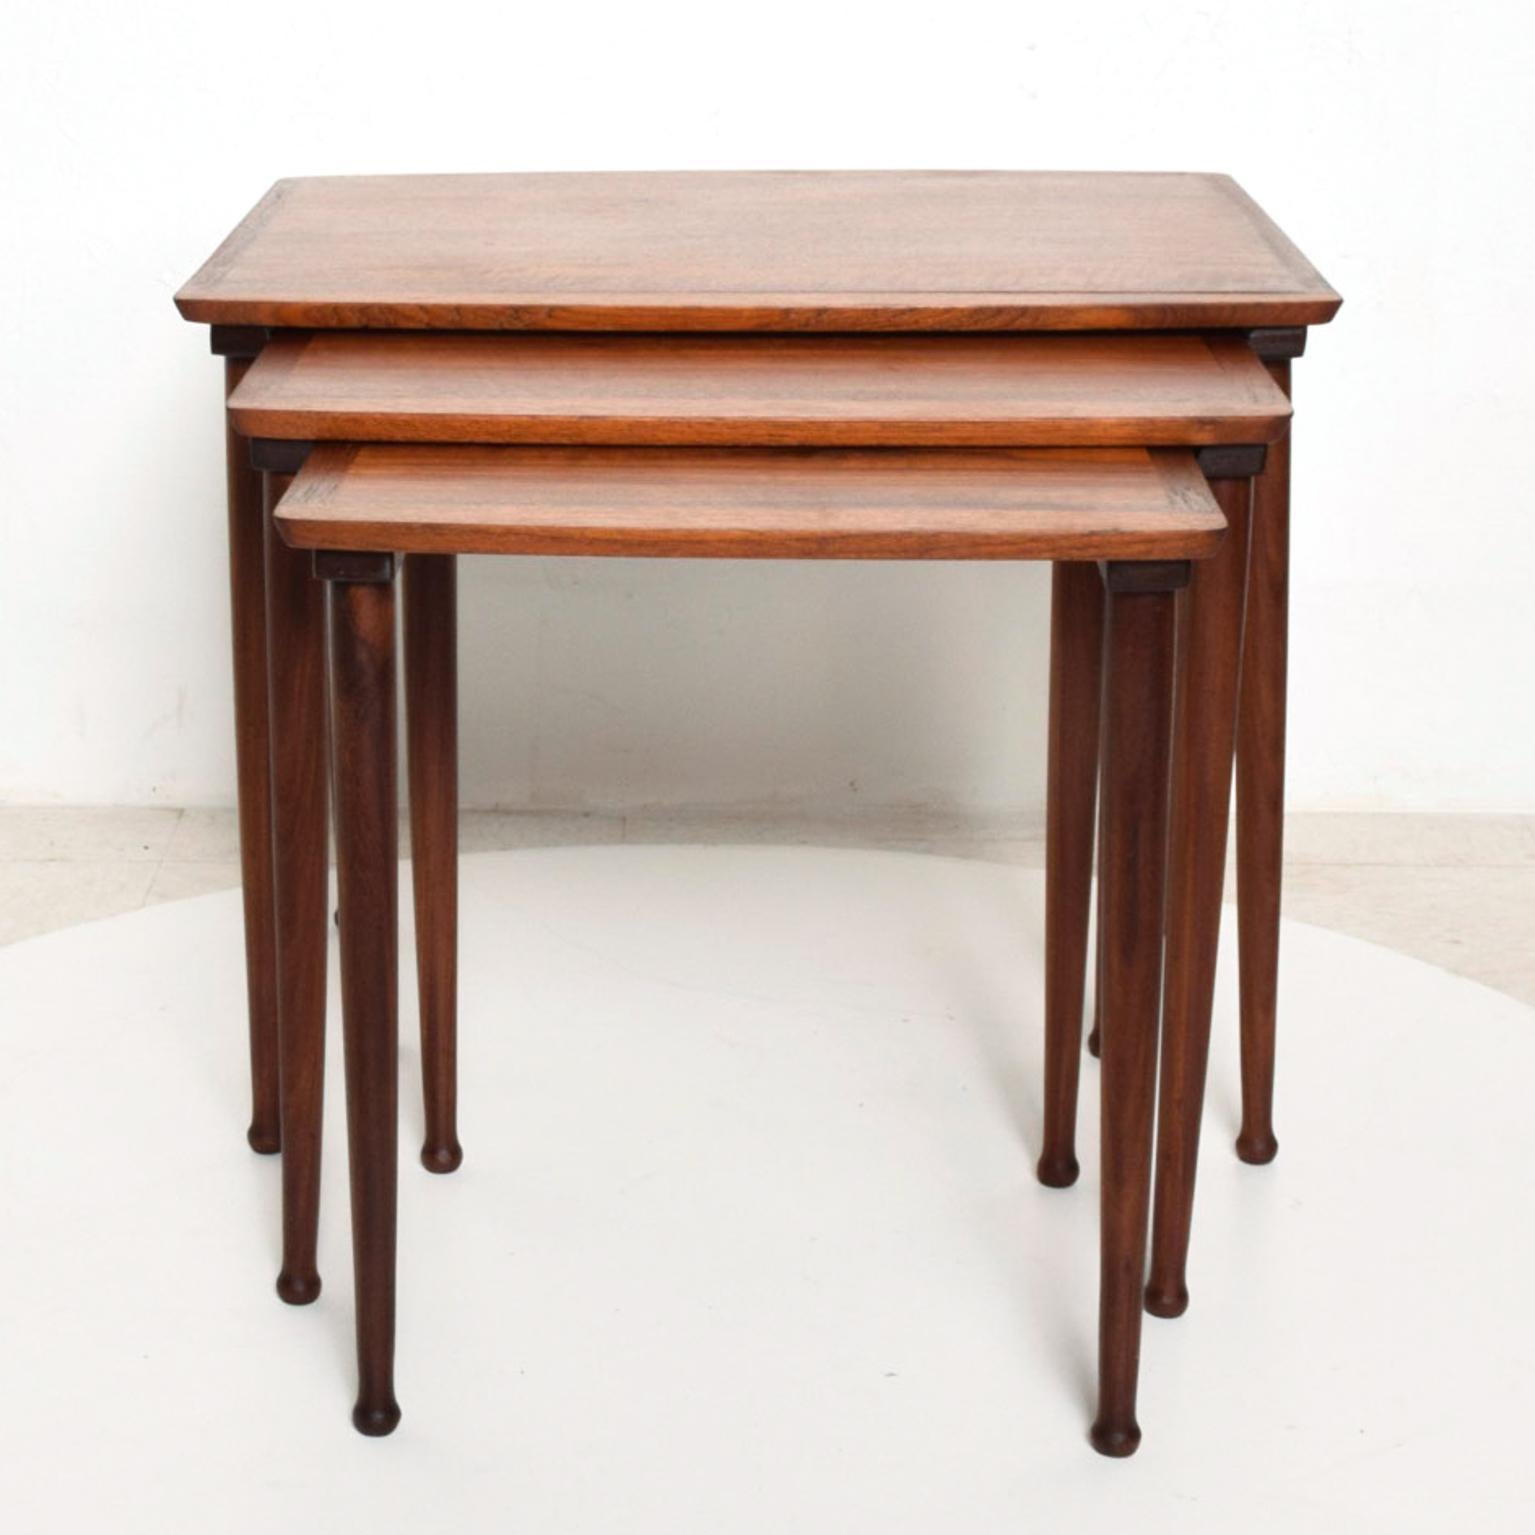 We are pleased to offer for your consideration a set of three teak nesting tables made in Denmark circa the 1960s by Mobelintarsia.

Stamped underneath with Danish modern control label. 

Legs can be removed for safe and easy